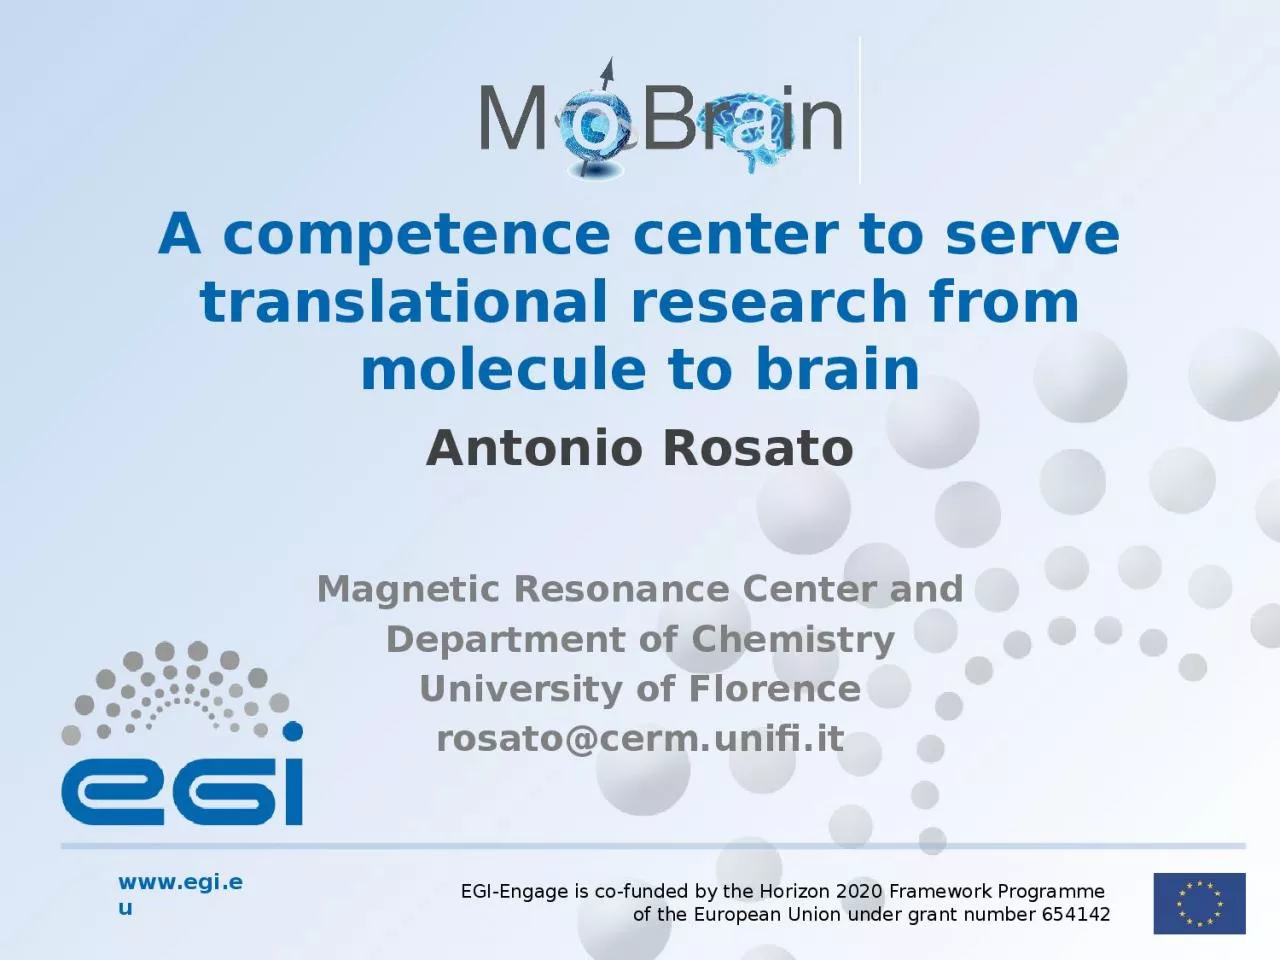 Magnetic Resonance Center and